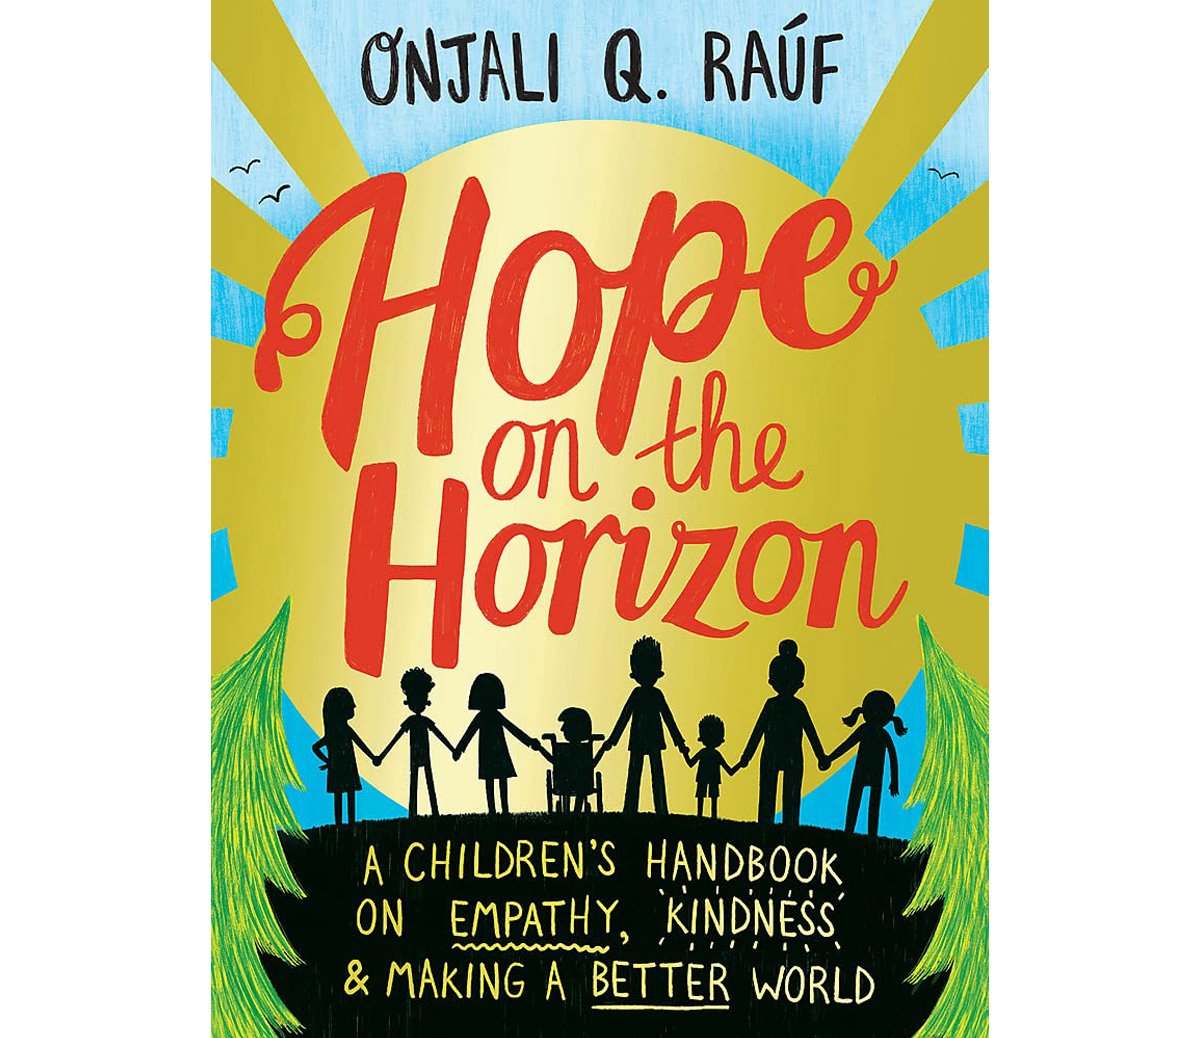 pippa-curnick-hope-on-the-horizon-cover-illustration.jpg